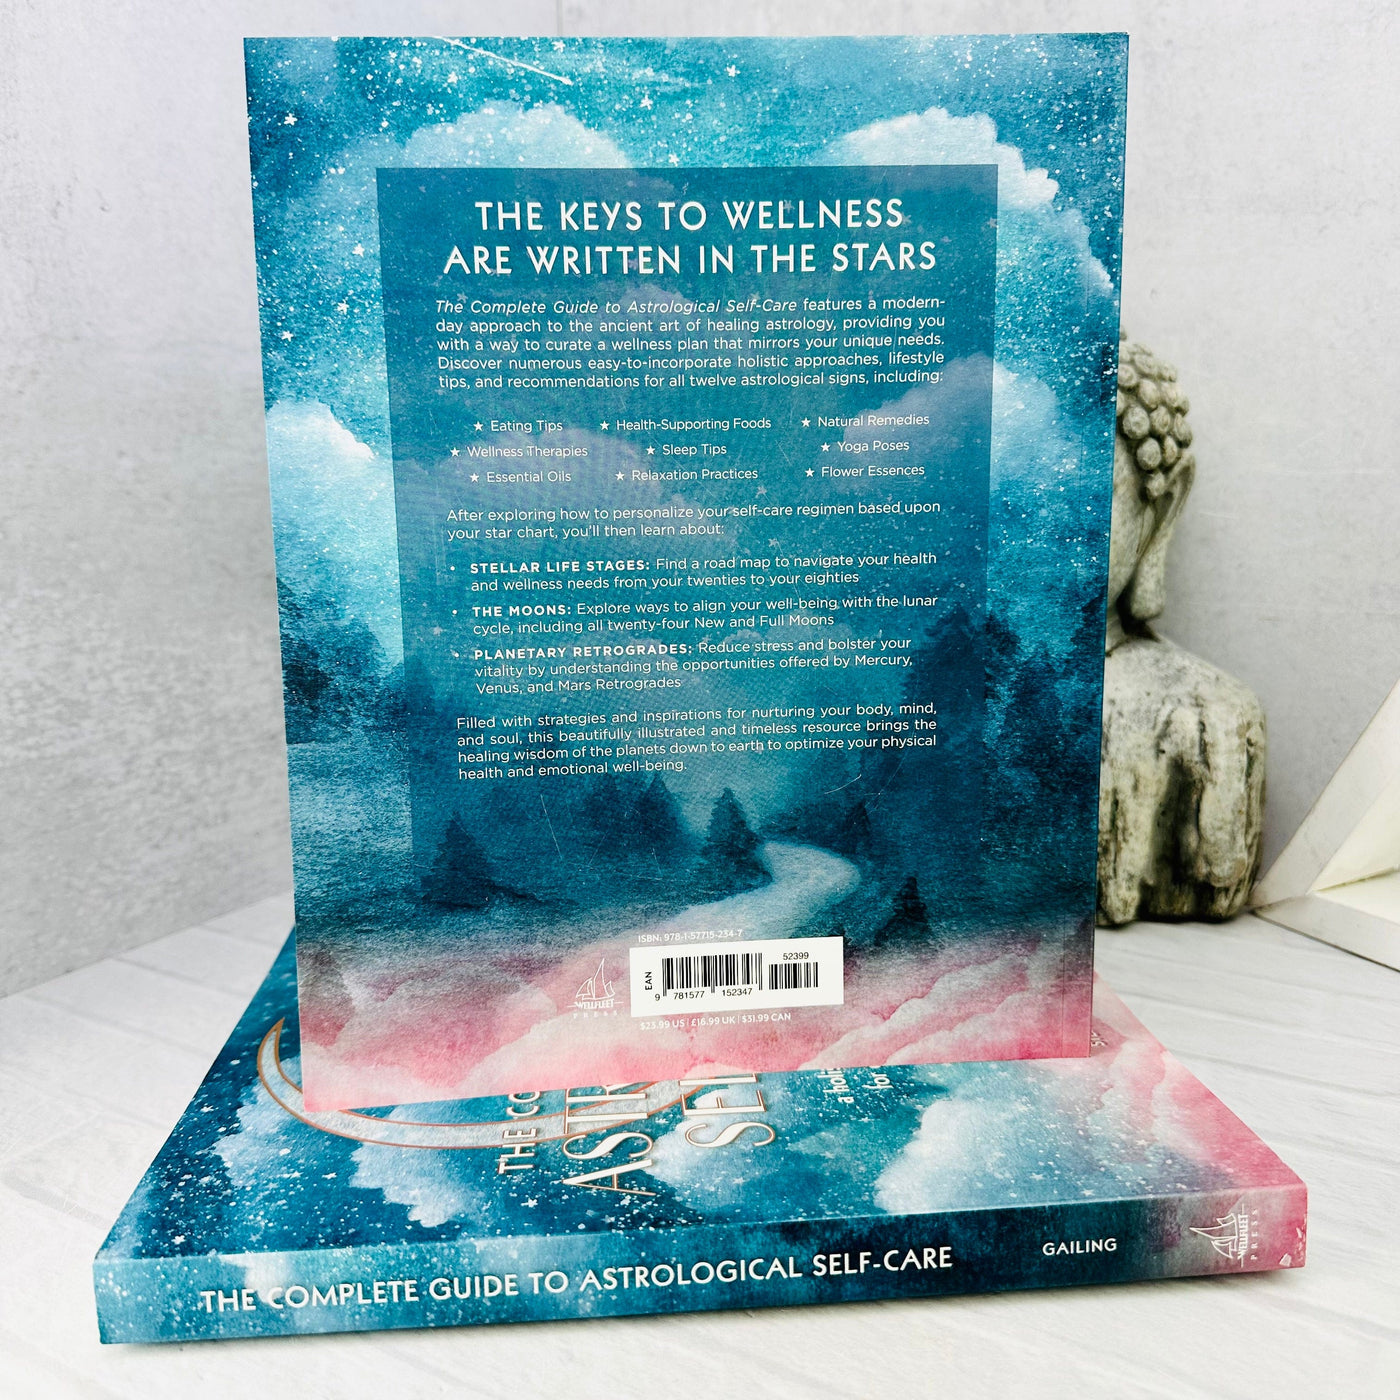  The Complete Guide To Astrological Self Care - back view of book